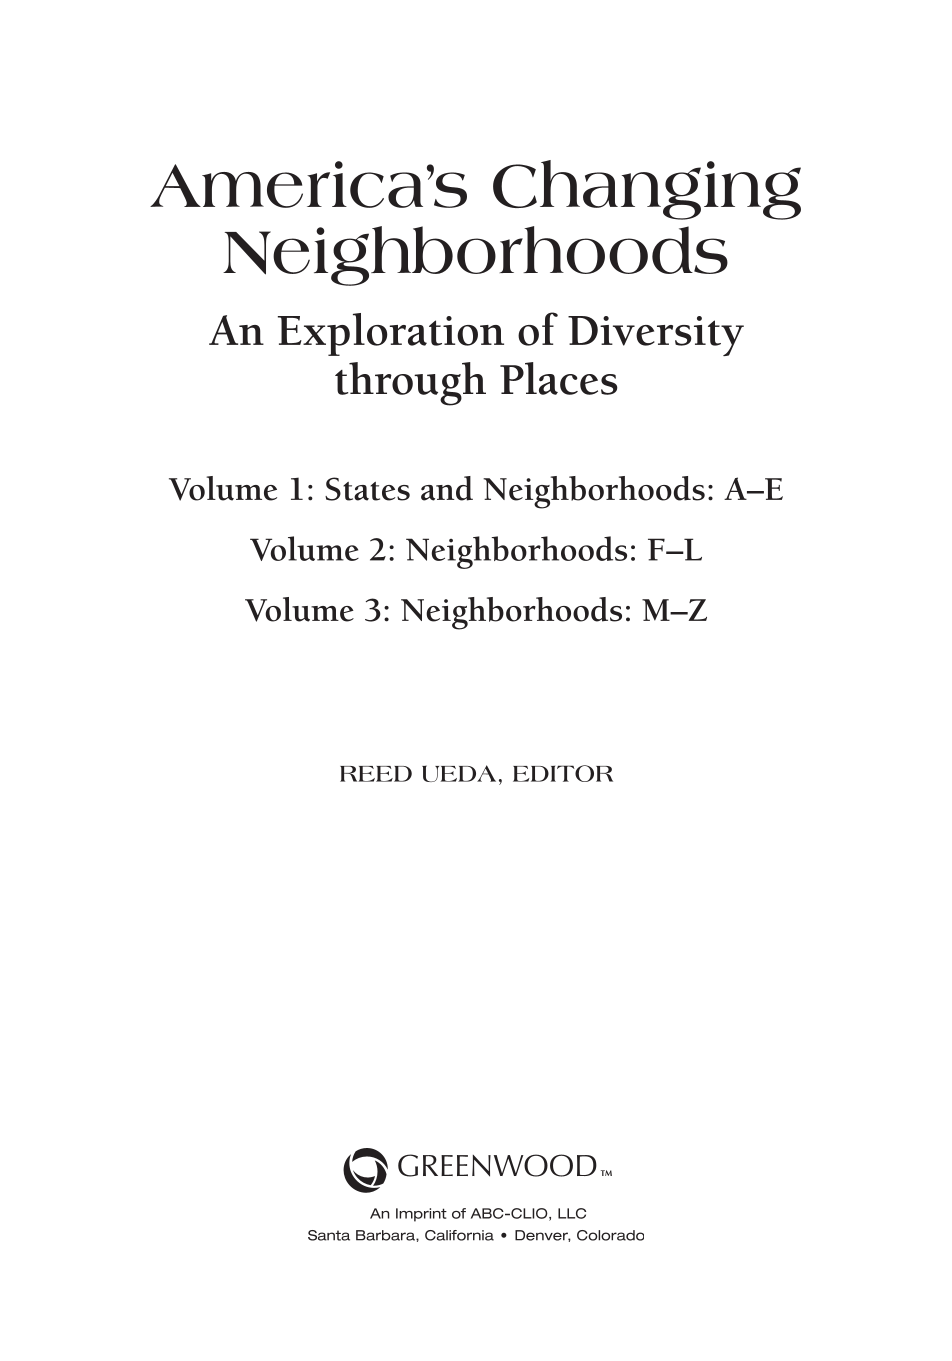 America's Changing Neighborhoods: An Exploration of Diversity through Places [3 volumes] page iii